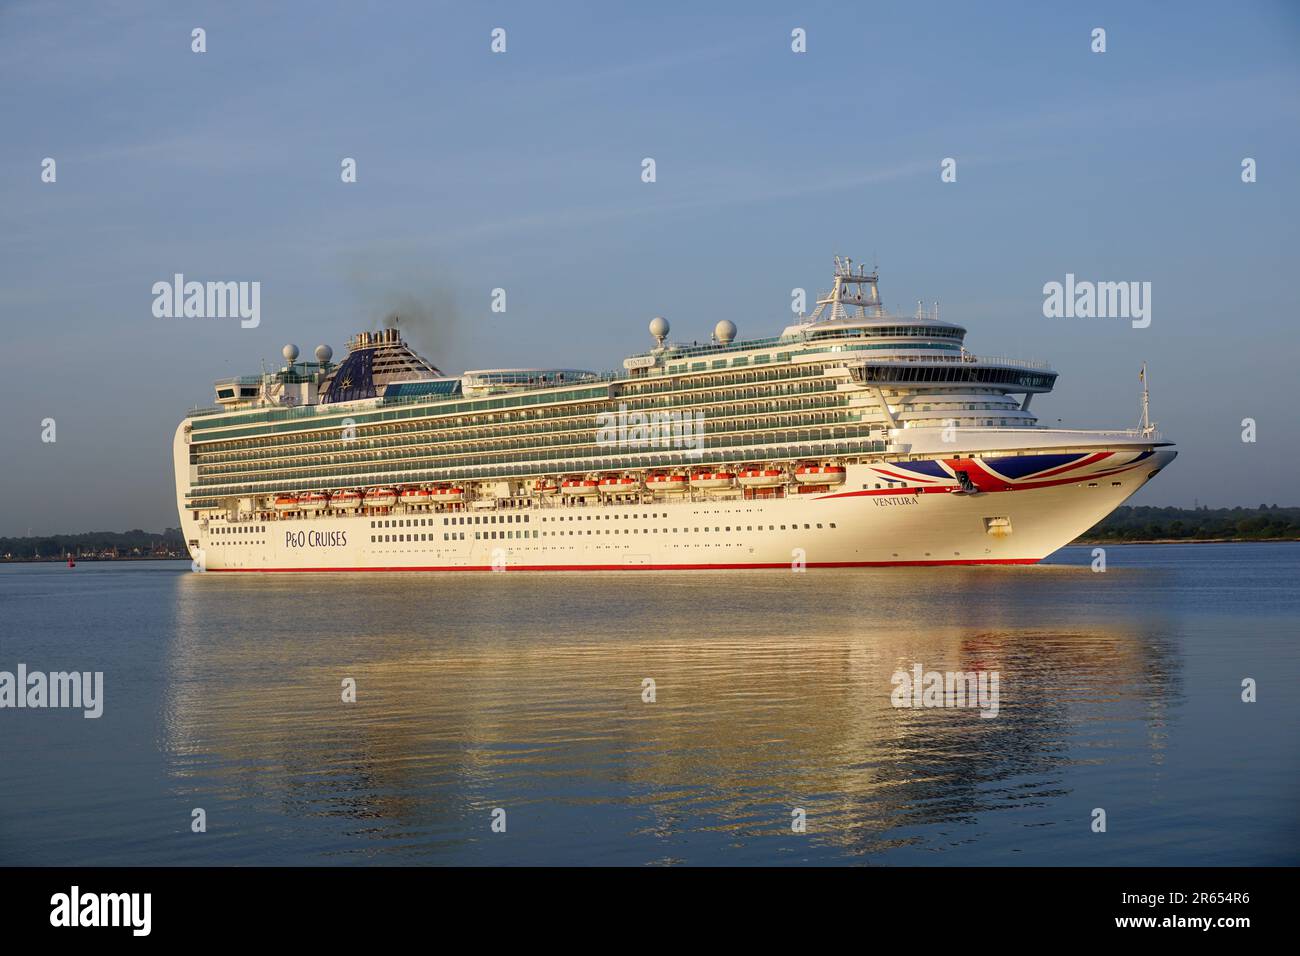 Southampton UK 27 May 2023 - Ventura cruise ship coming in to dock at port of Southampton. Large passenger cruise vessel from P&O cruises Stock Photo